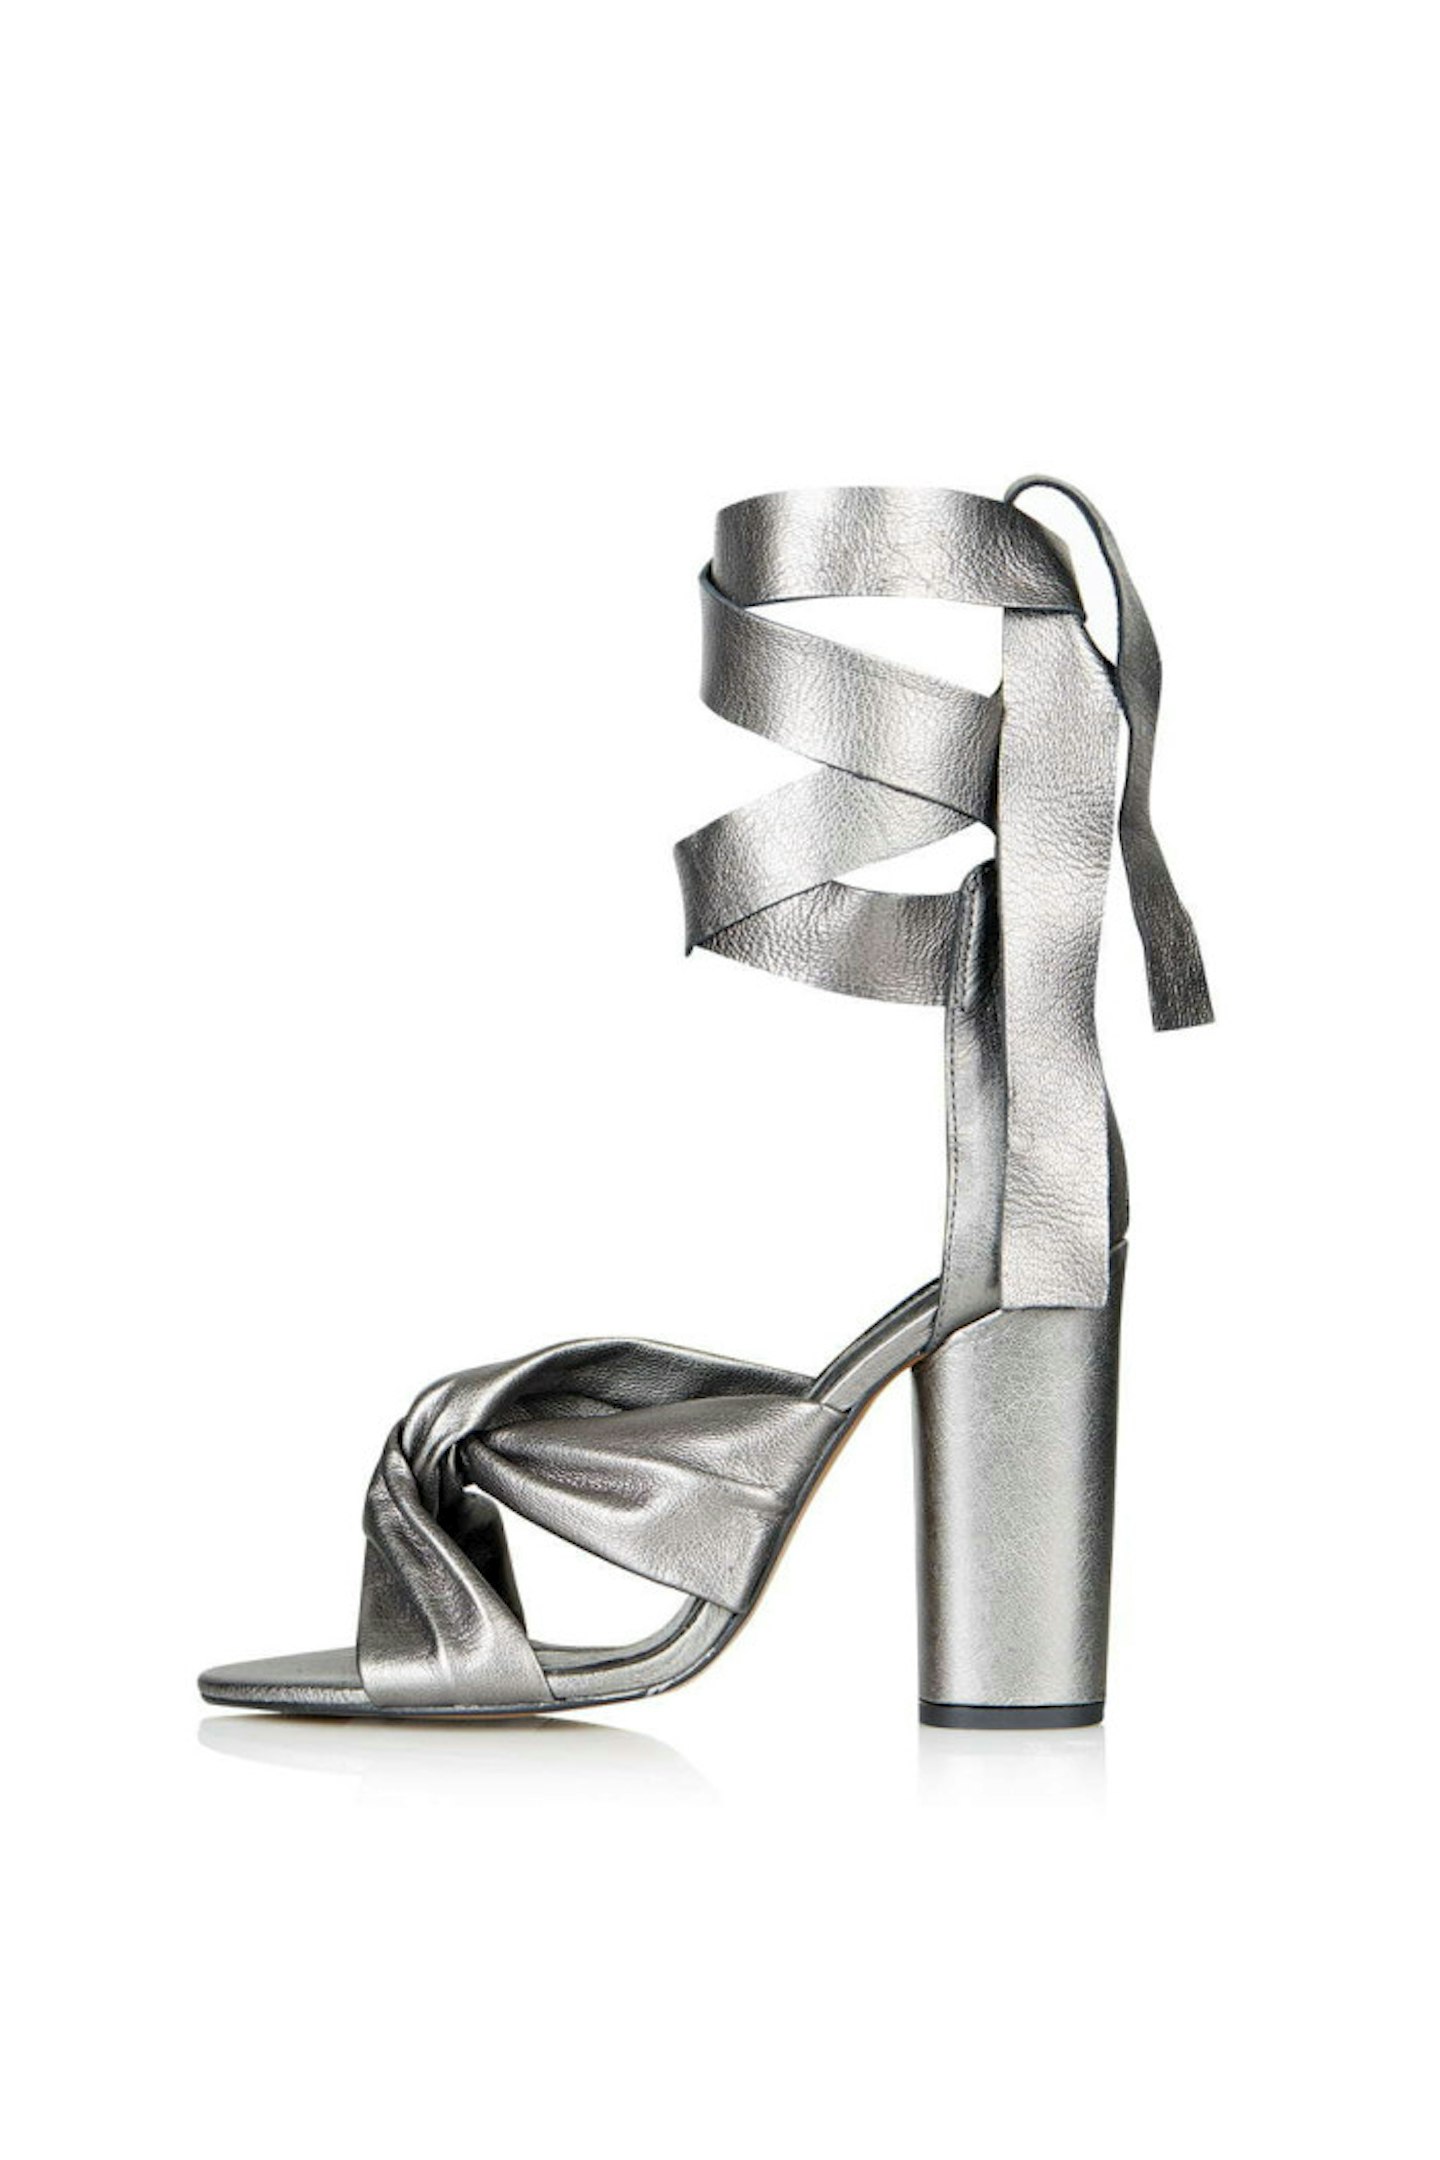 These killer sandals are a fabulous excuse to nail the metallic trend